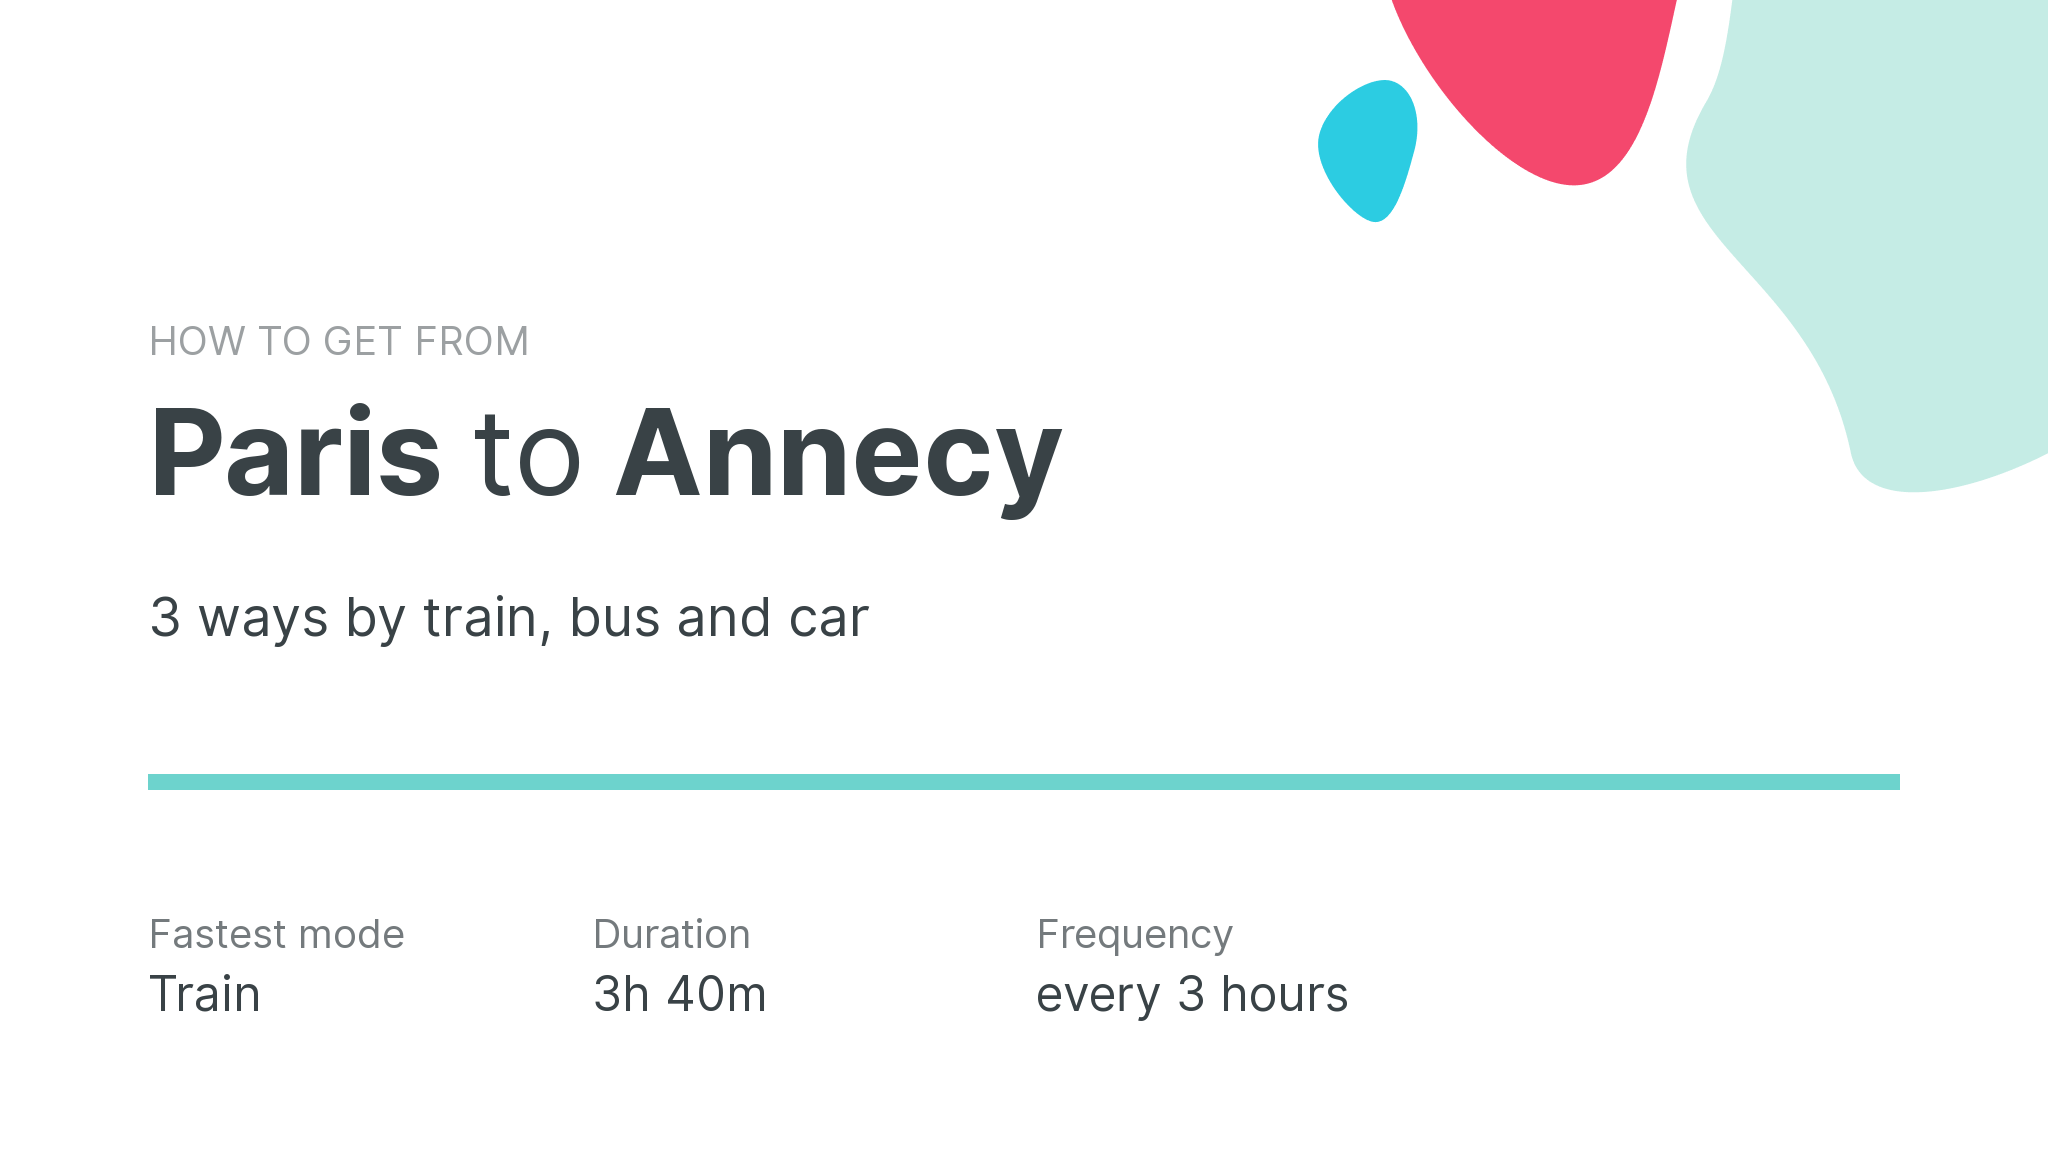 How do I get from Paris to Annecy